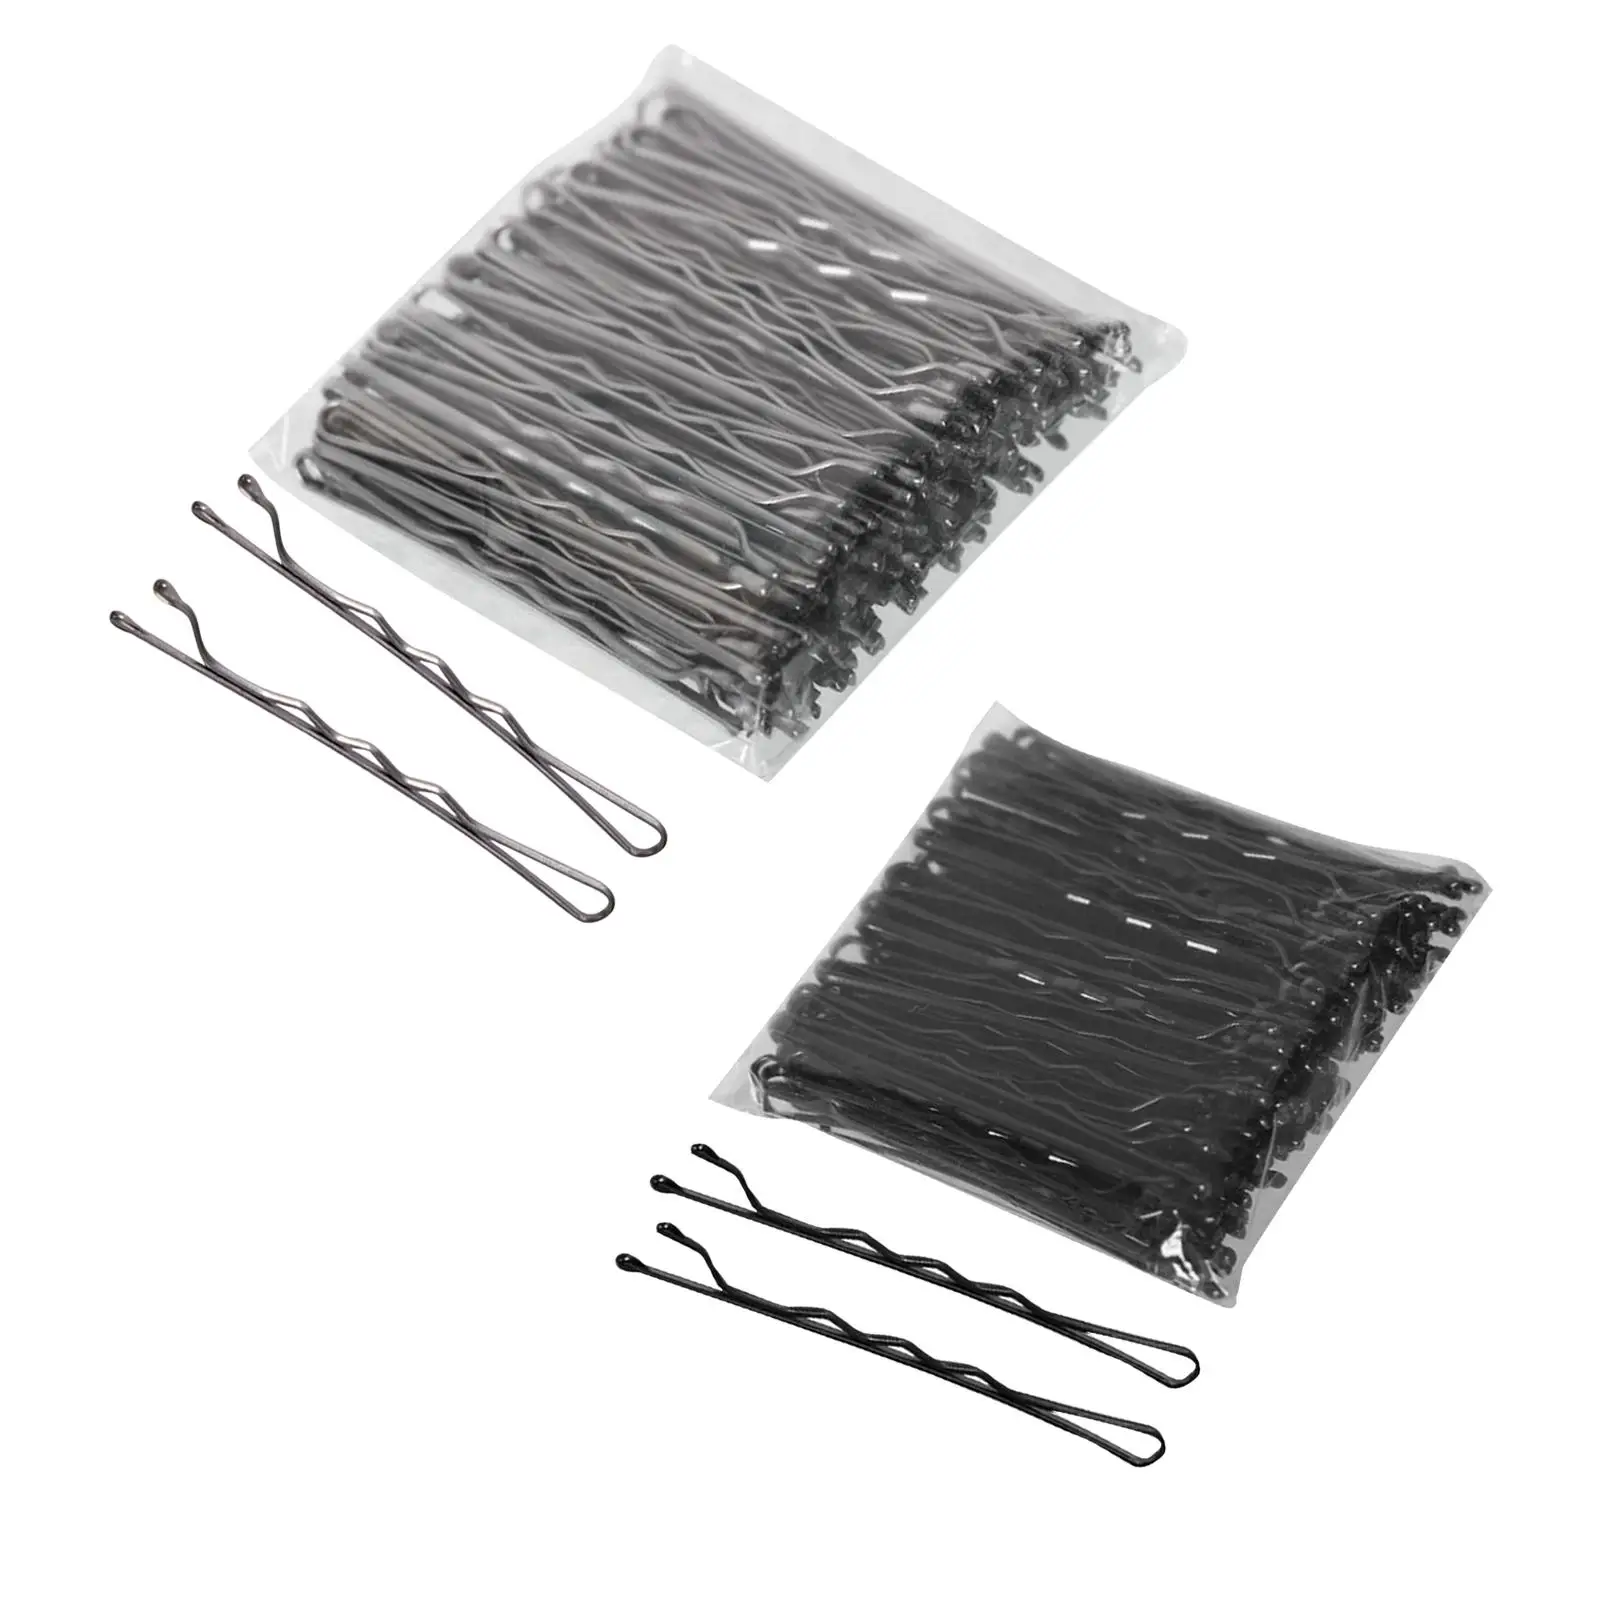 100 Pieces Hair Pin Keep Hair in Place Crimpled Slideproof Metal Hair Accessories for Wedding Hairstyling Women Lady